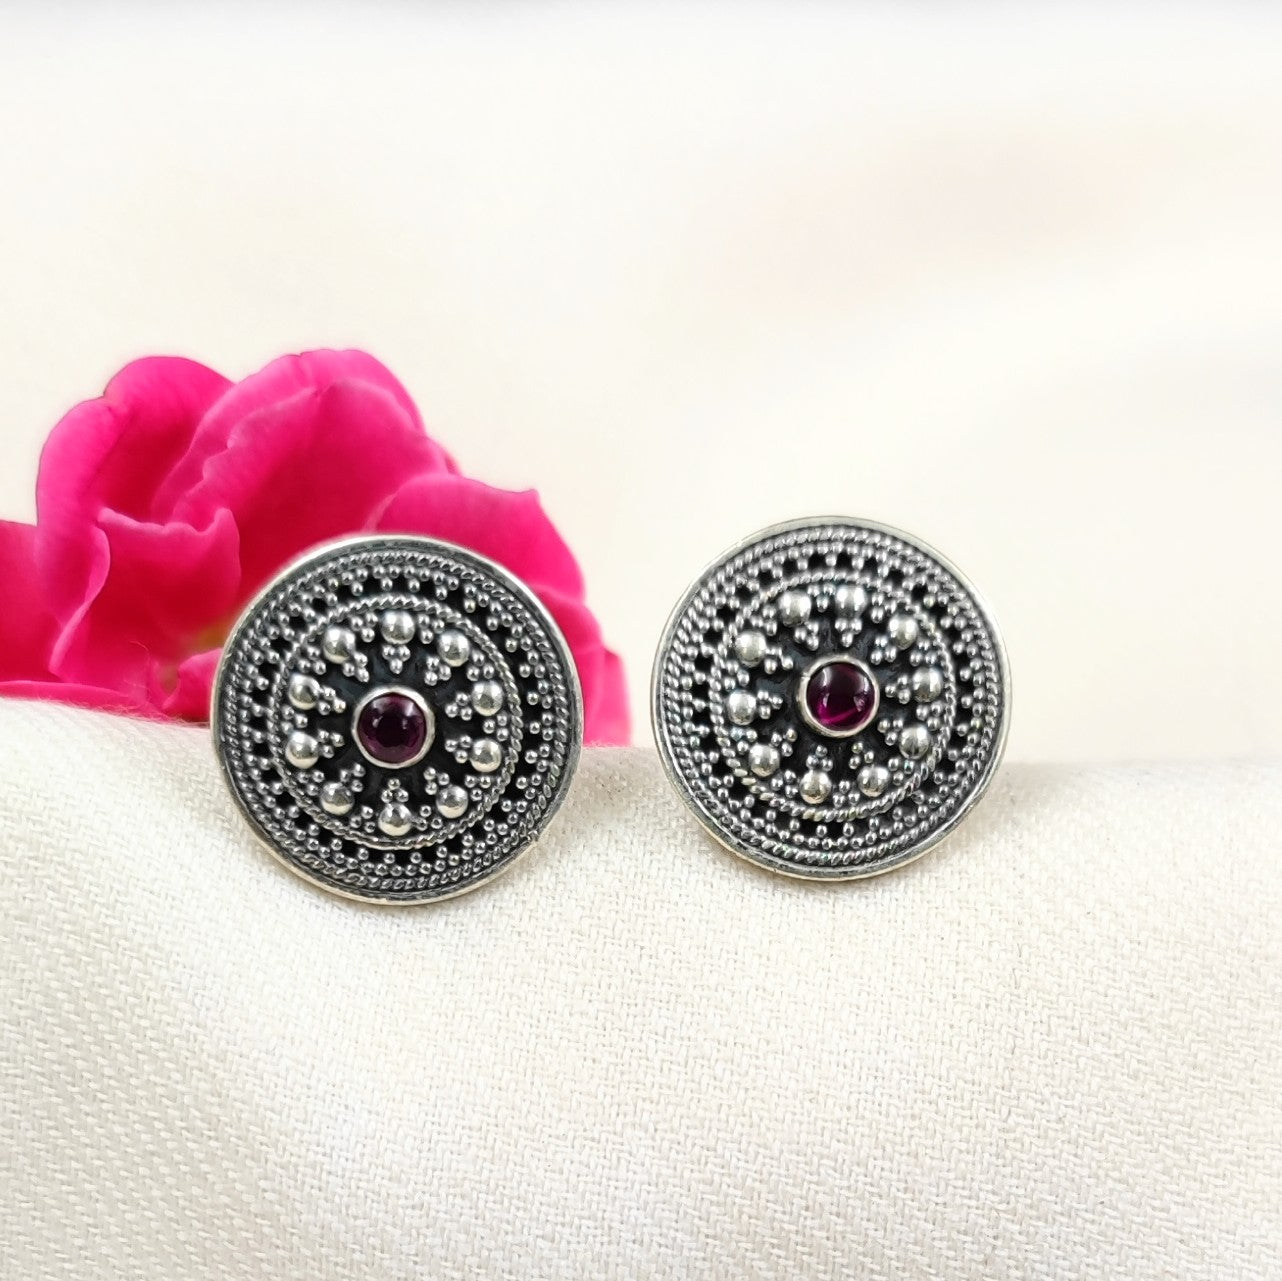 Silver Jewelry Earrings by Jauhri 92.5 Silver - Pink Shattrani Studs